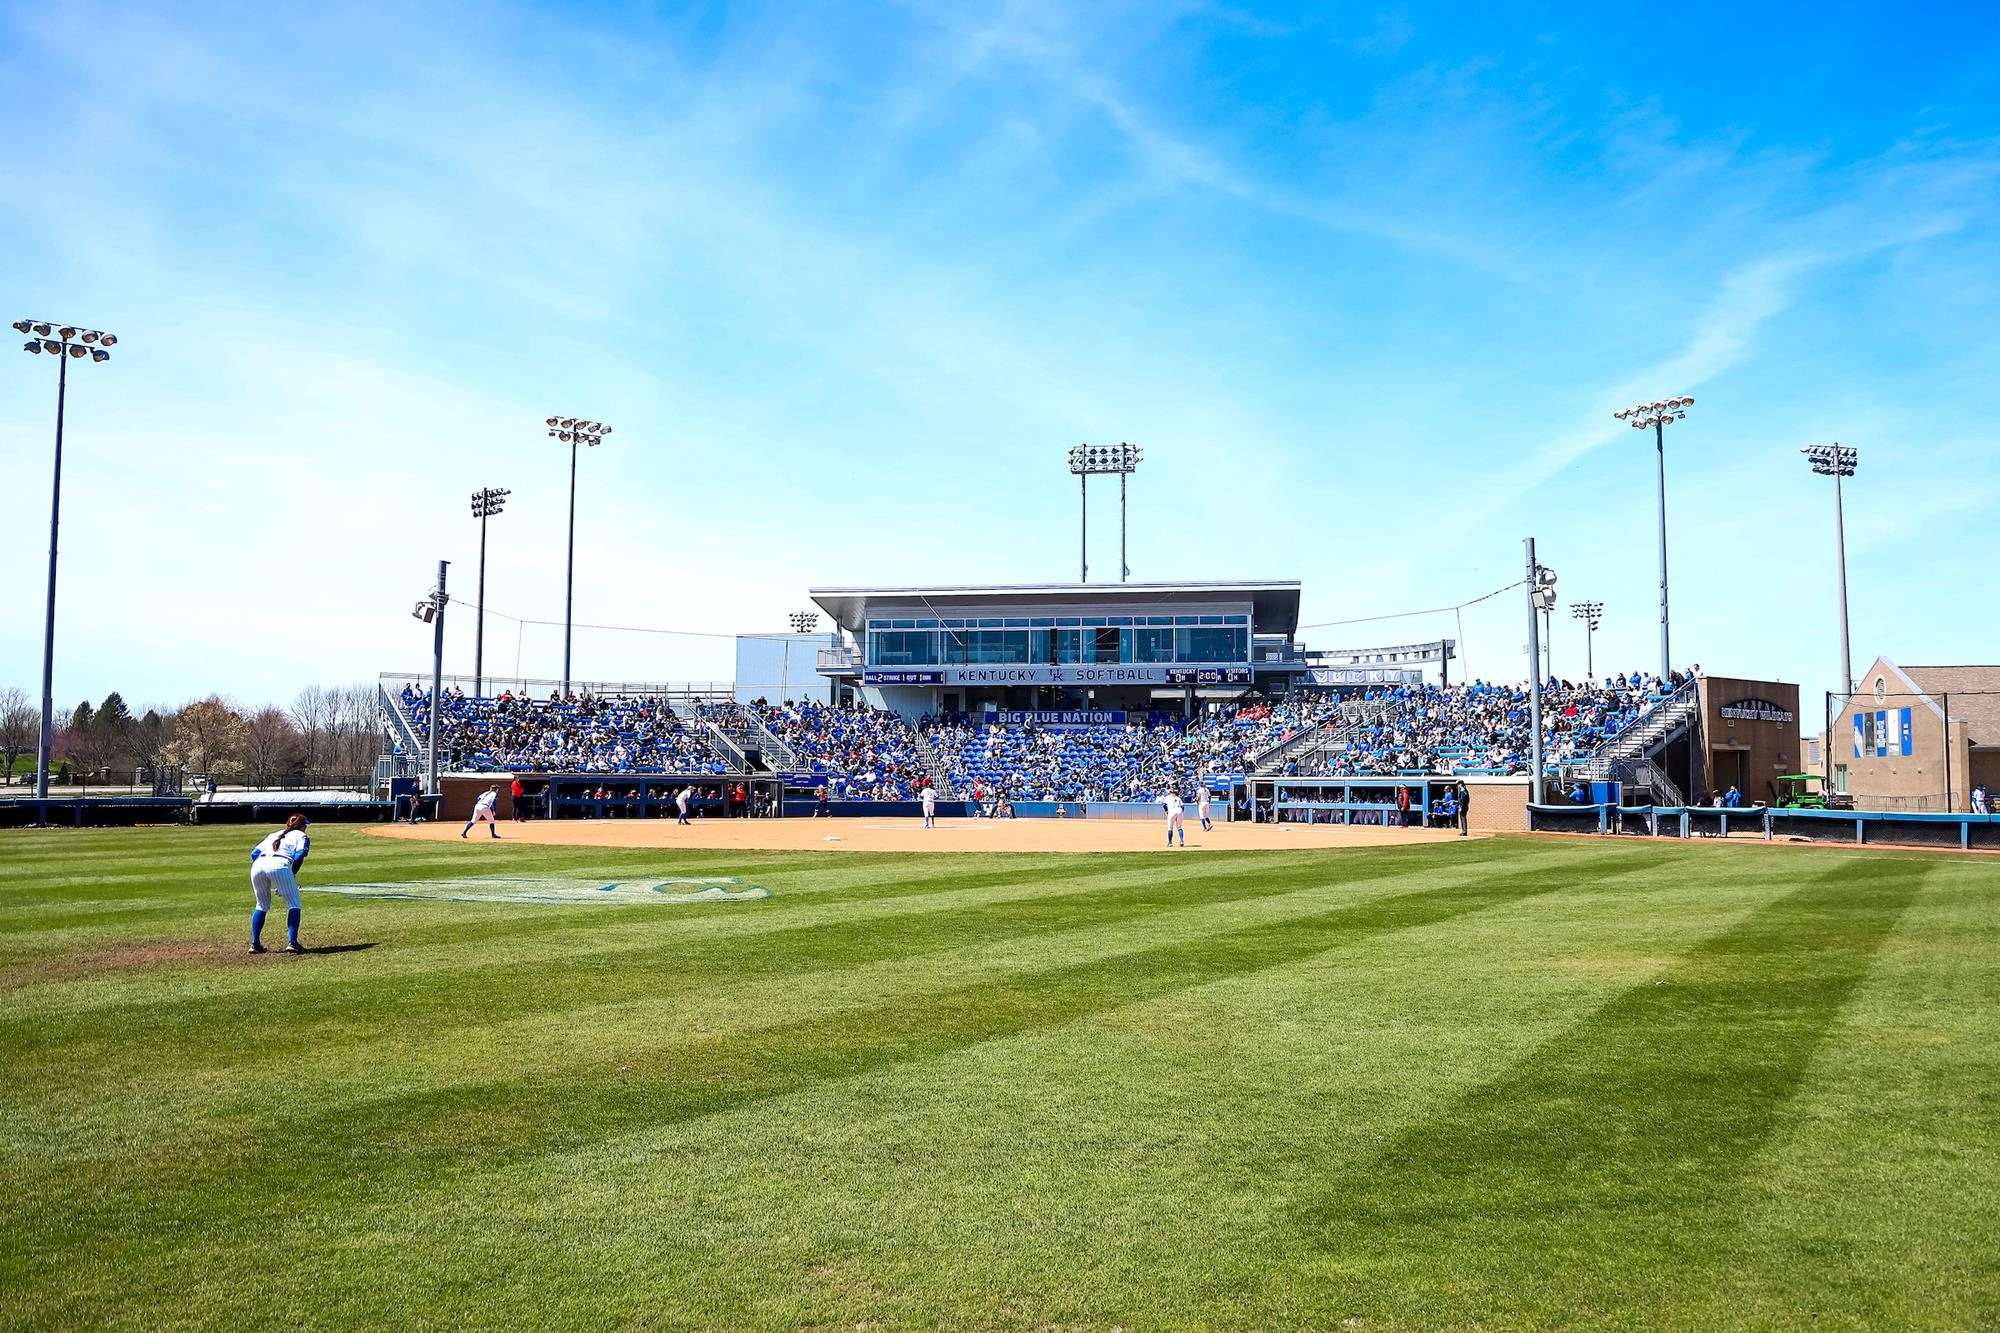 Emmy Blane’s Offensive Outburst Lifts No. 8 Kentucky to DH Sweep